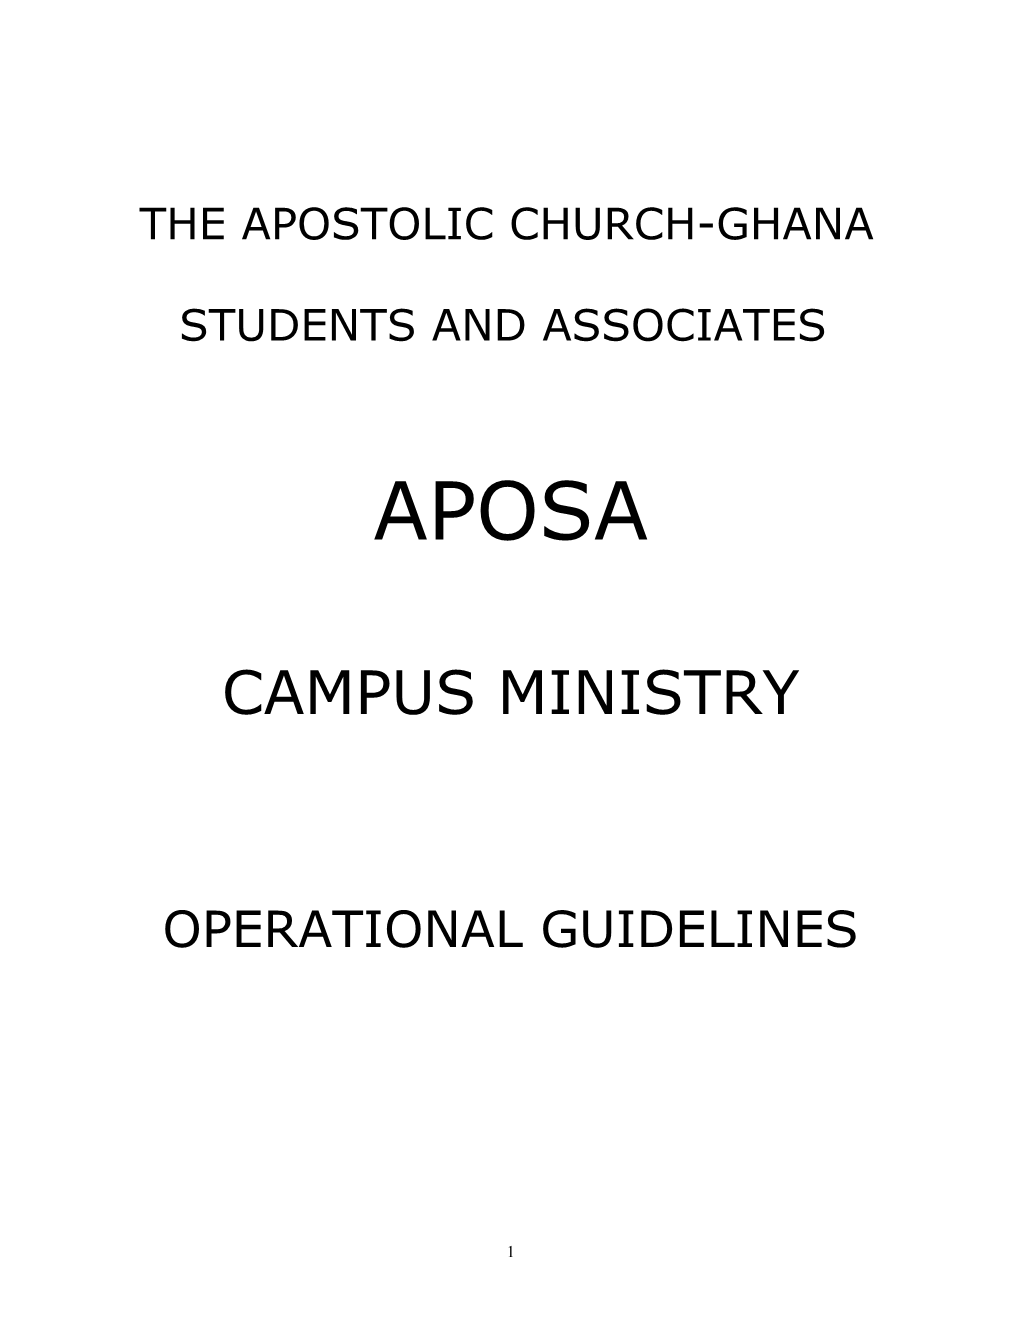 The Apostolic Church-Ghana Students and Associates (Aposa) Operational Guidelines for The